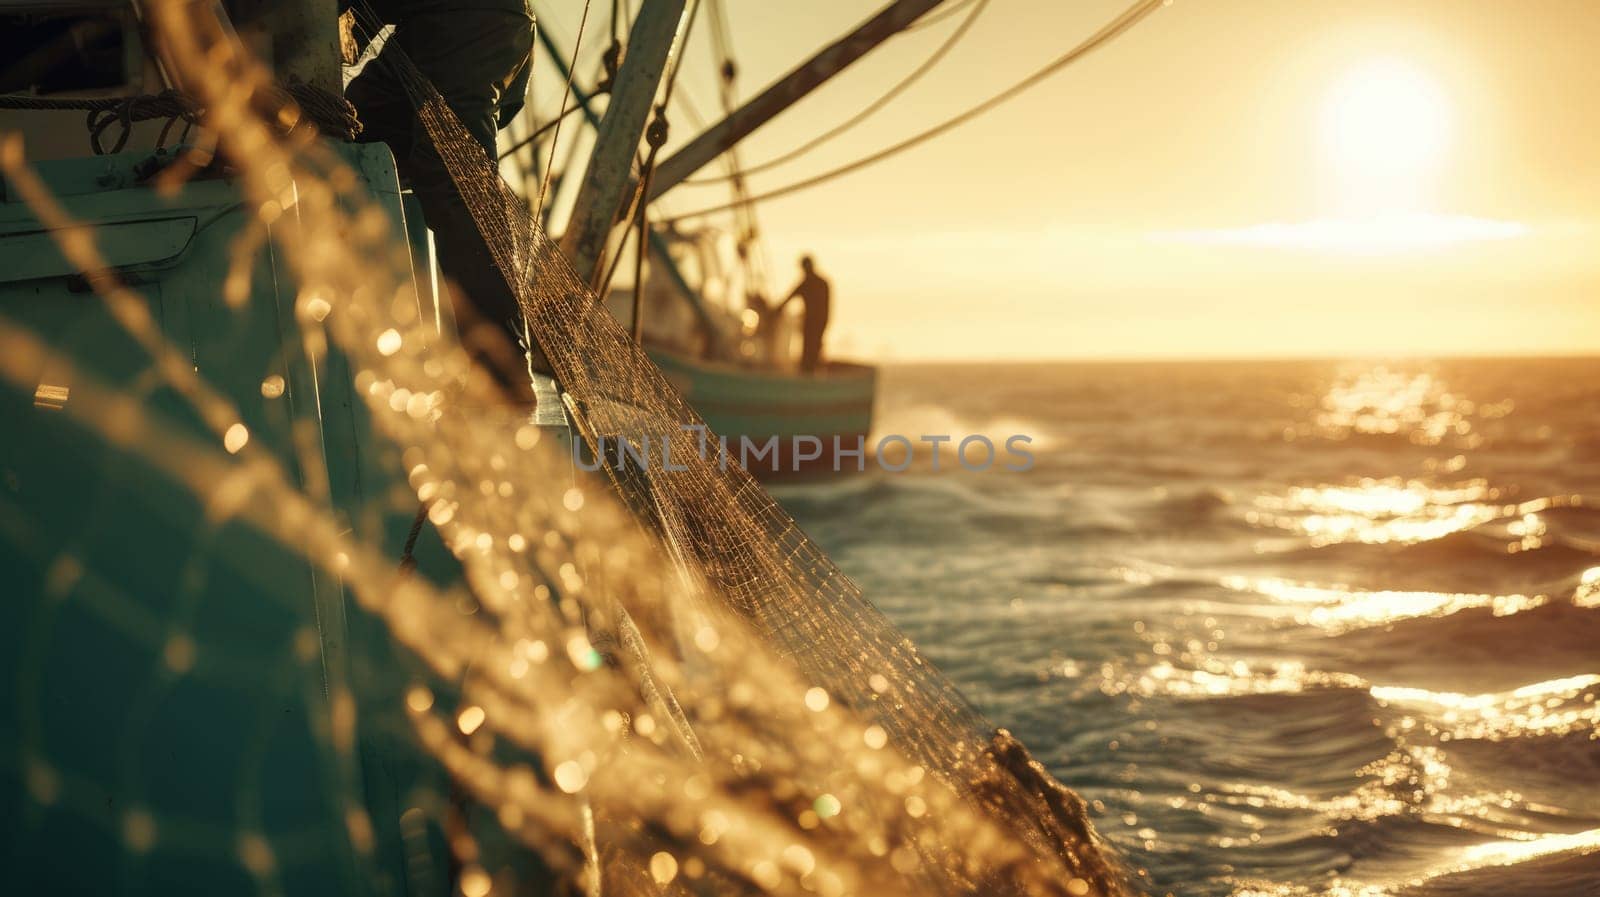 A group of fishermen enjoying the sunset while standing on a boat in the middle of the ocean, surrounded by water and the vast sky above. AIG41